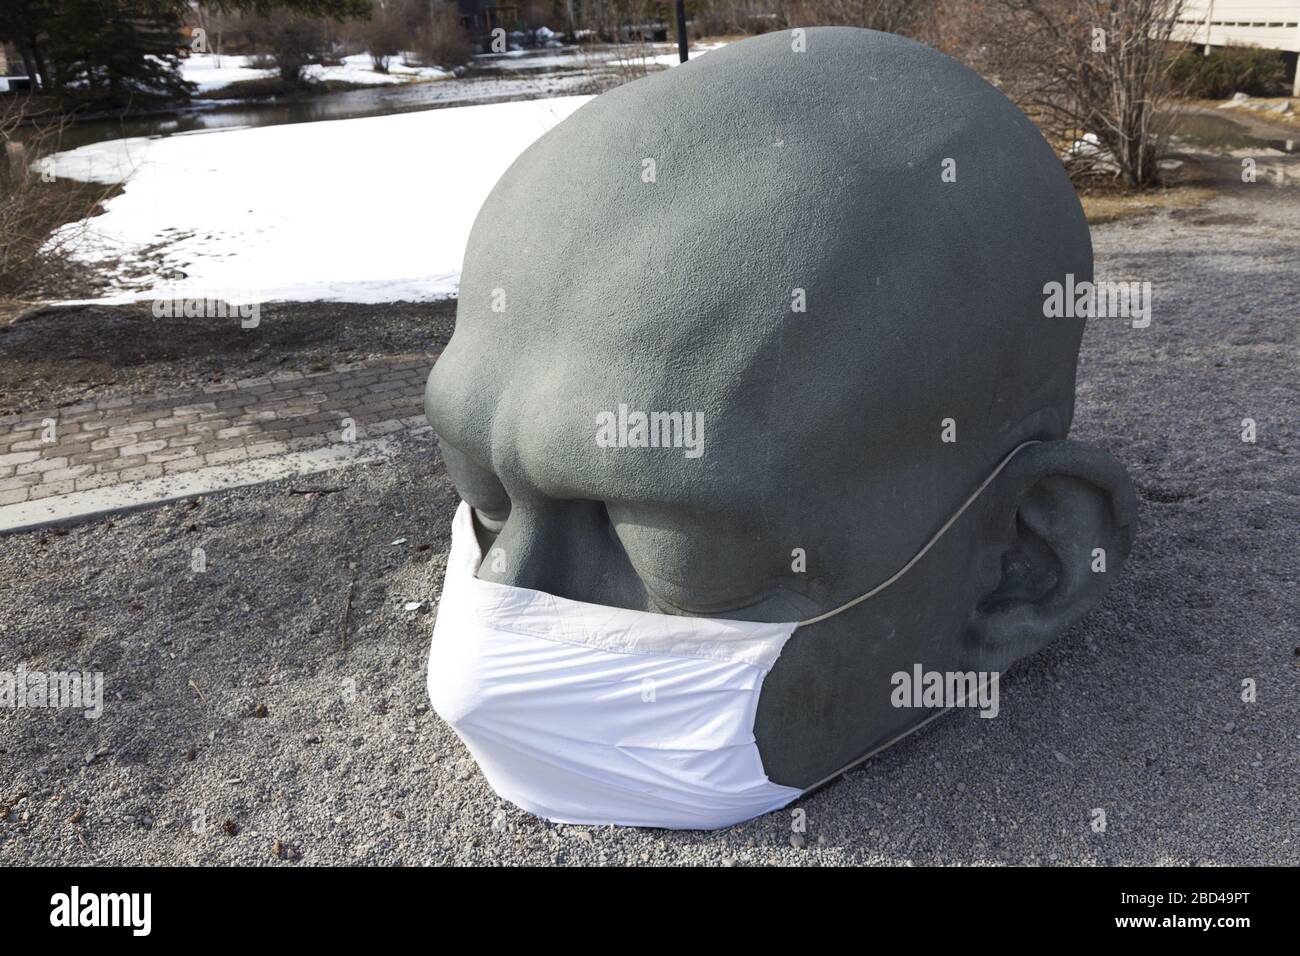 Big Head Sculpture landmark by artist Al Henderson, with white surgical mask, protection for COVID-19 Coronavirus Pandemic. Canmore, Alberta Canada Stock Photo